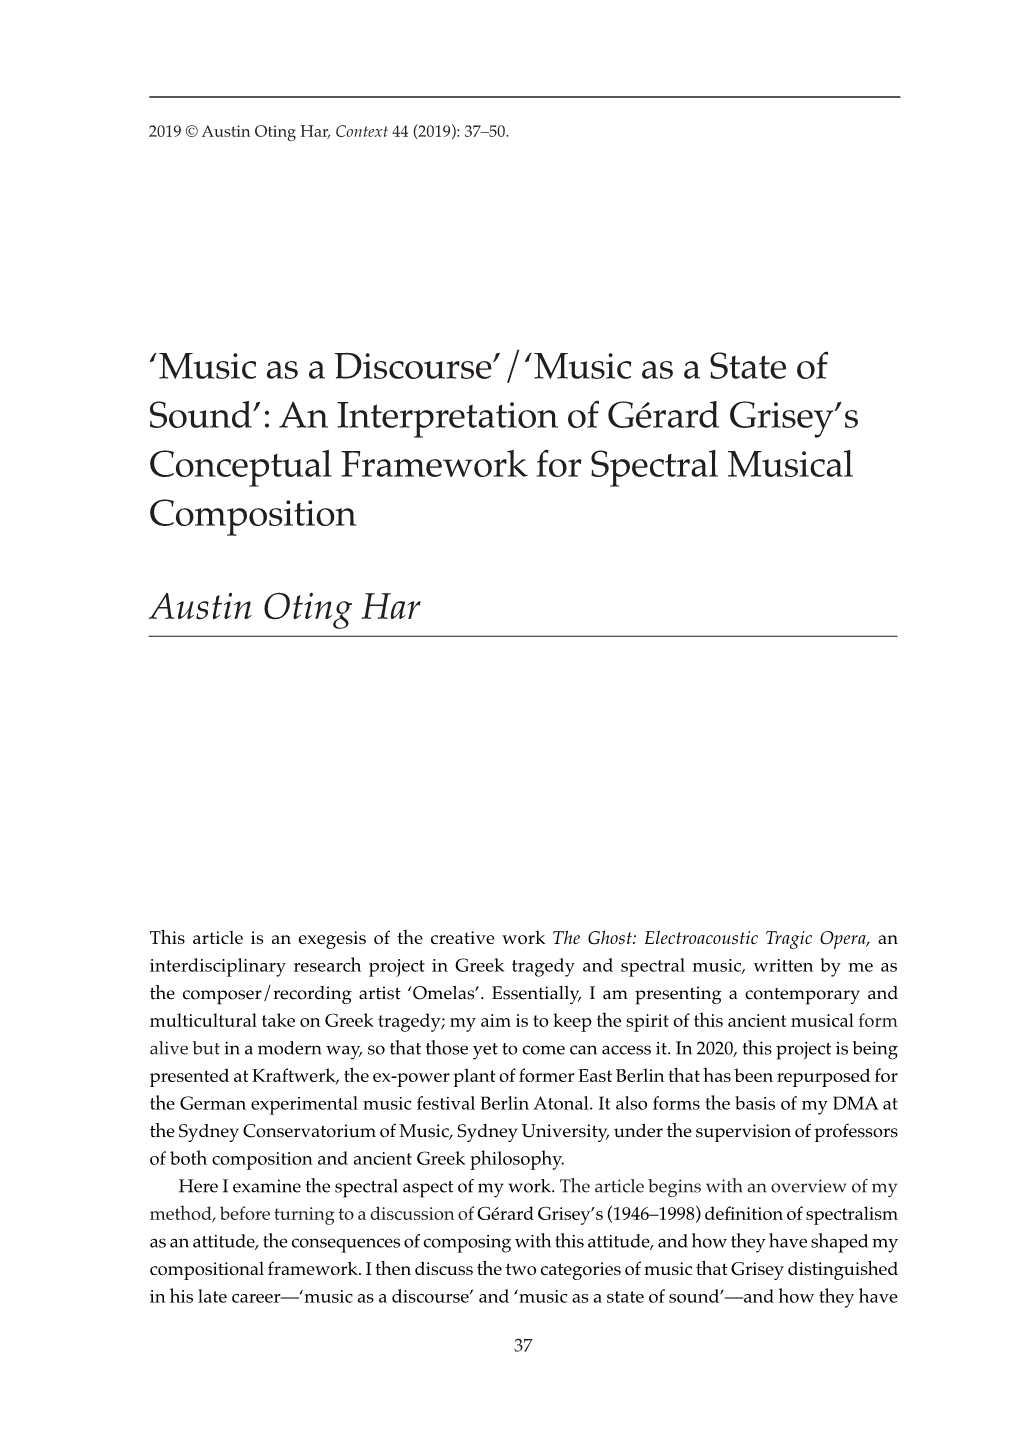 'Music As a Discourse'/'Music As a State of Sound': an Interpretation Of